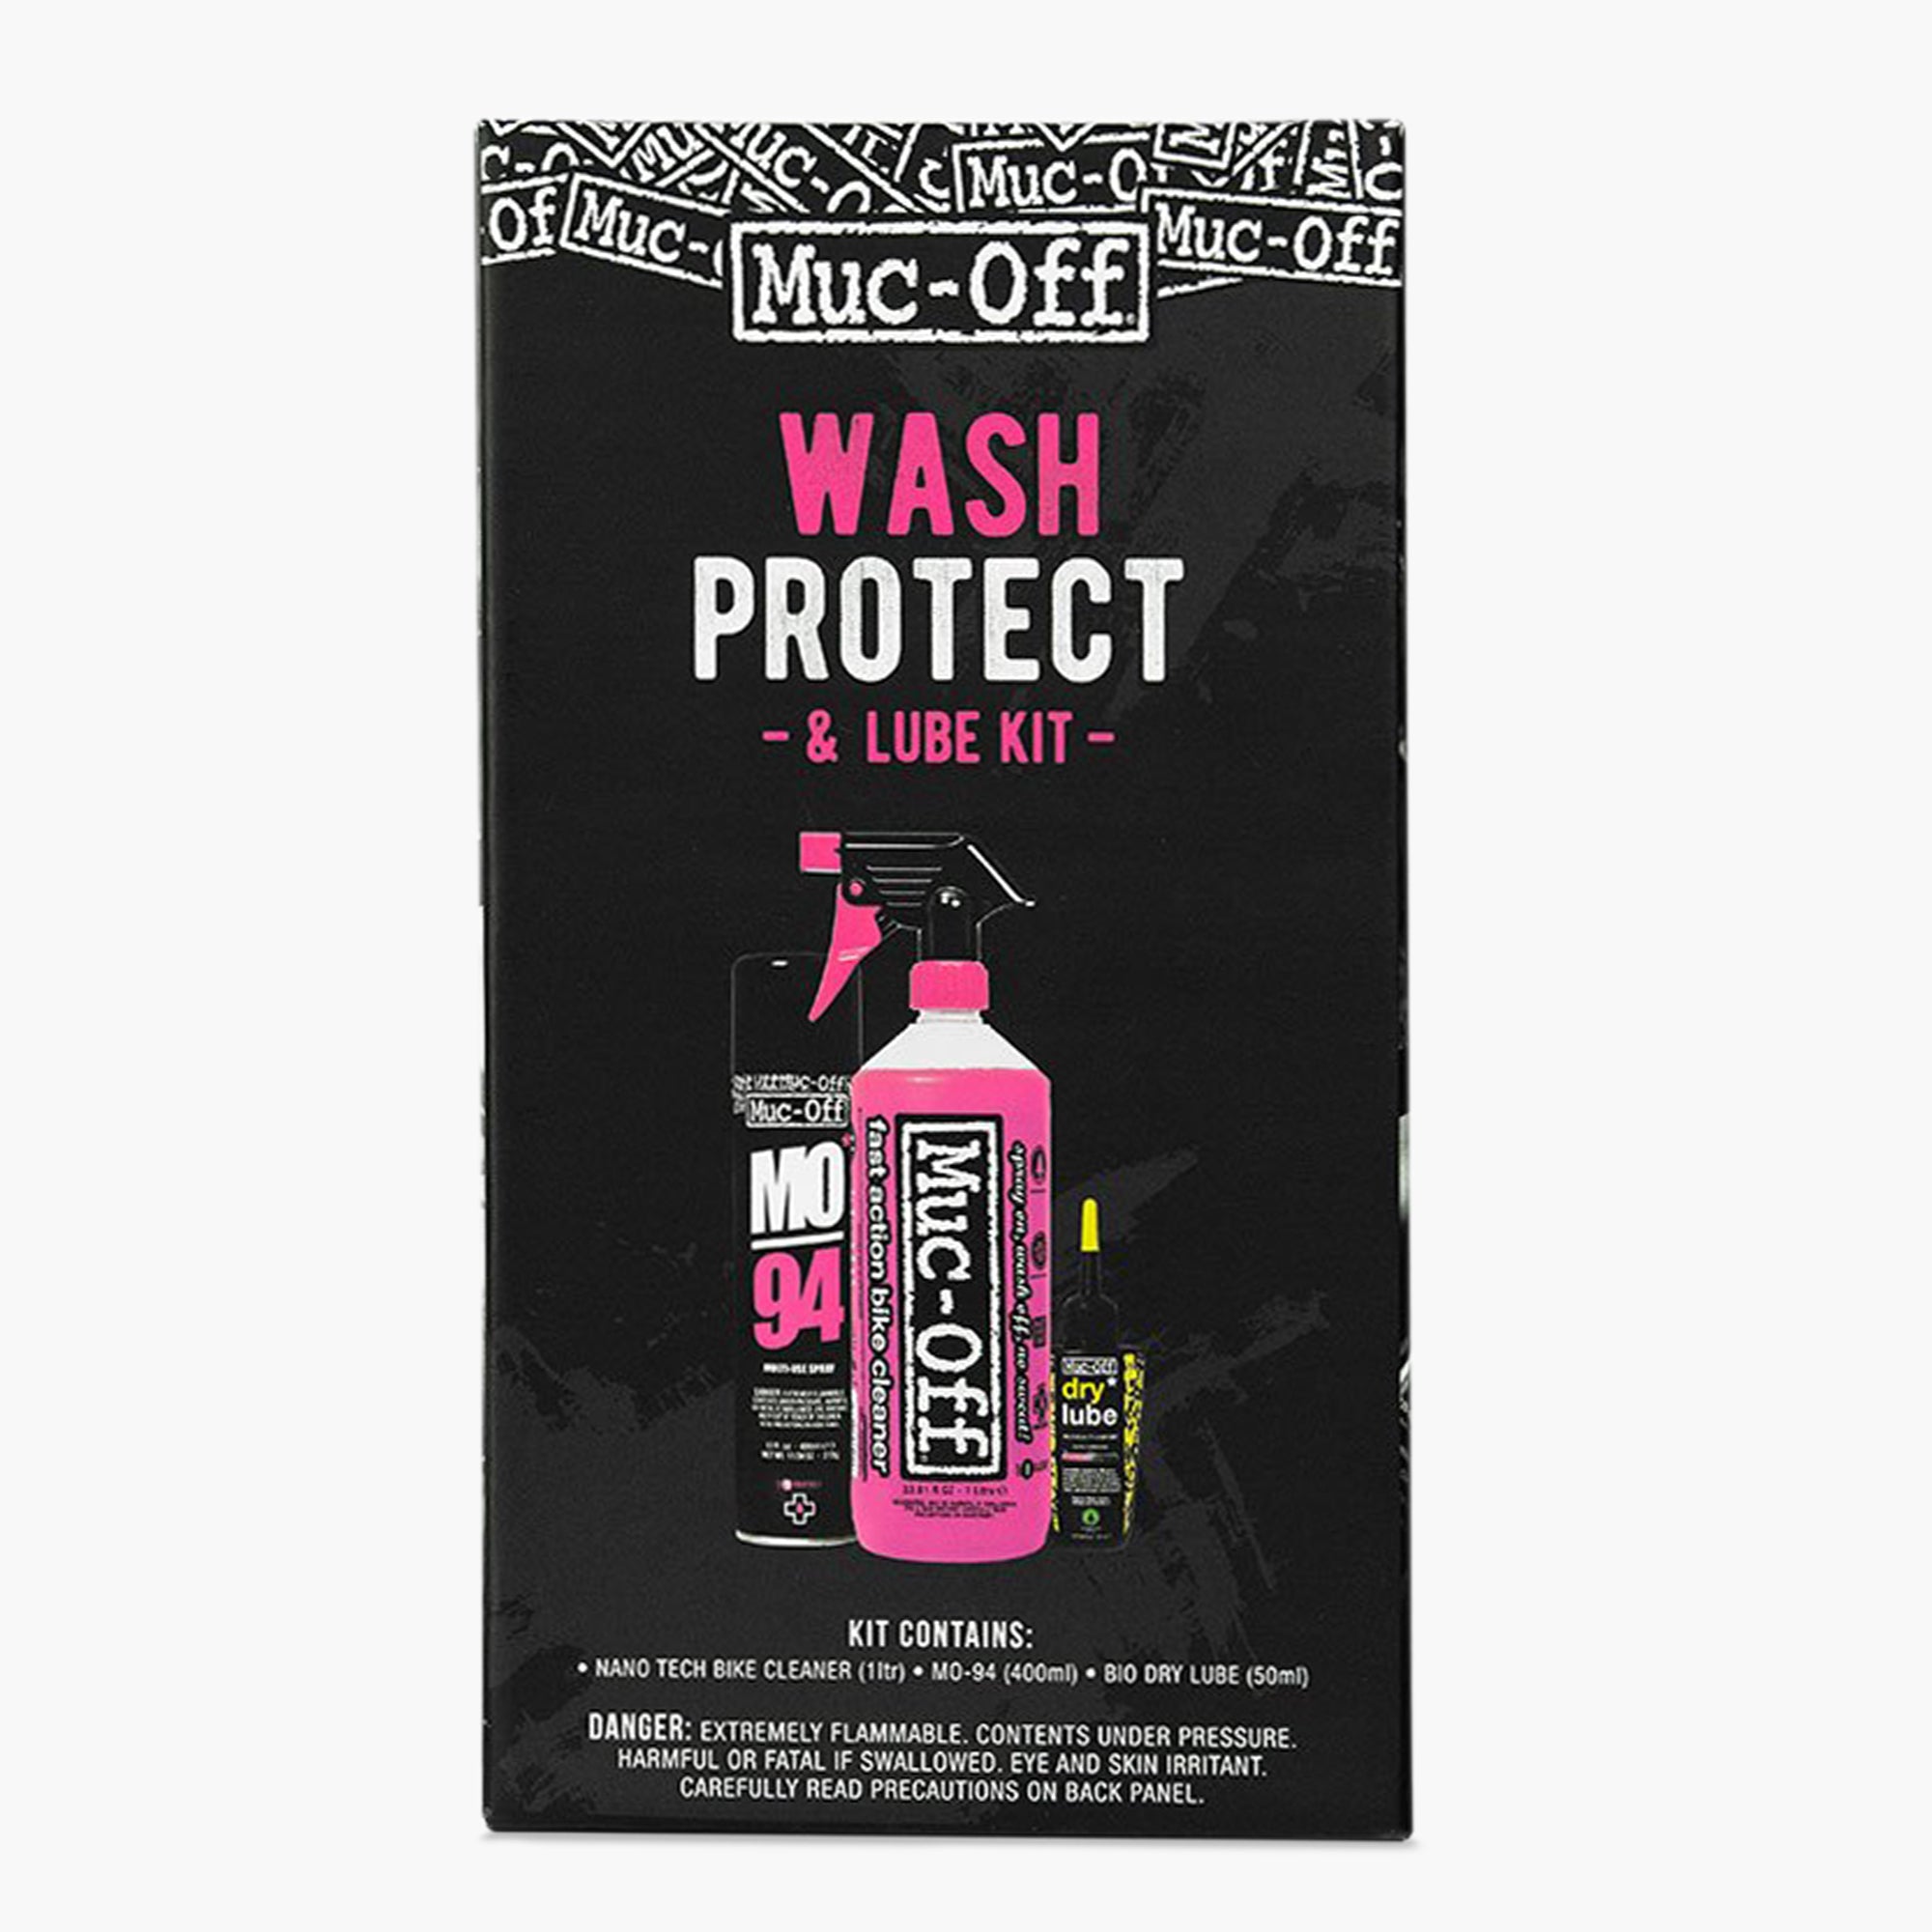 Muc-Off Ultimate Bicycle Cleaning Kit - Must-Have Kit to Clean, Protect and  Lube Your Bike - Includes Bike Cleaner, Bike Protect, Brushes and More